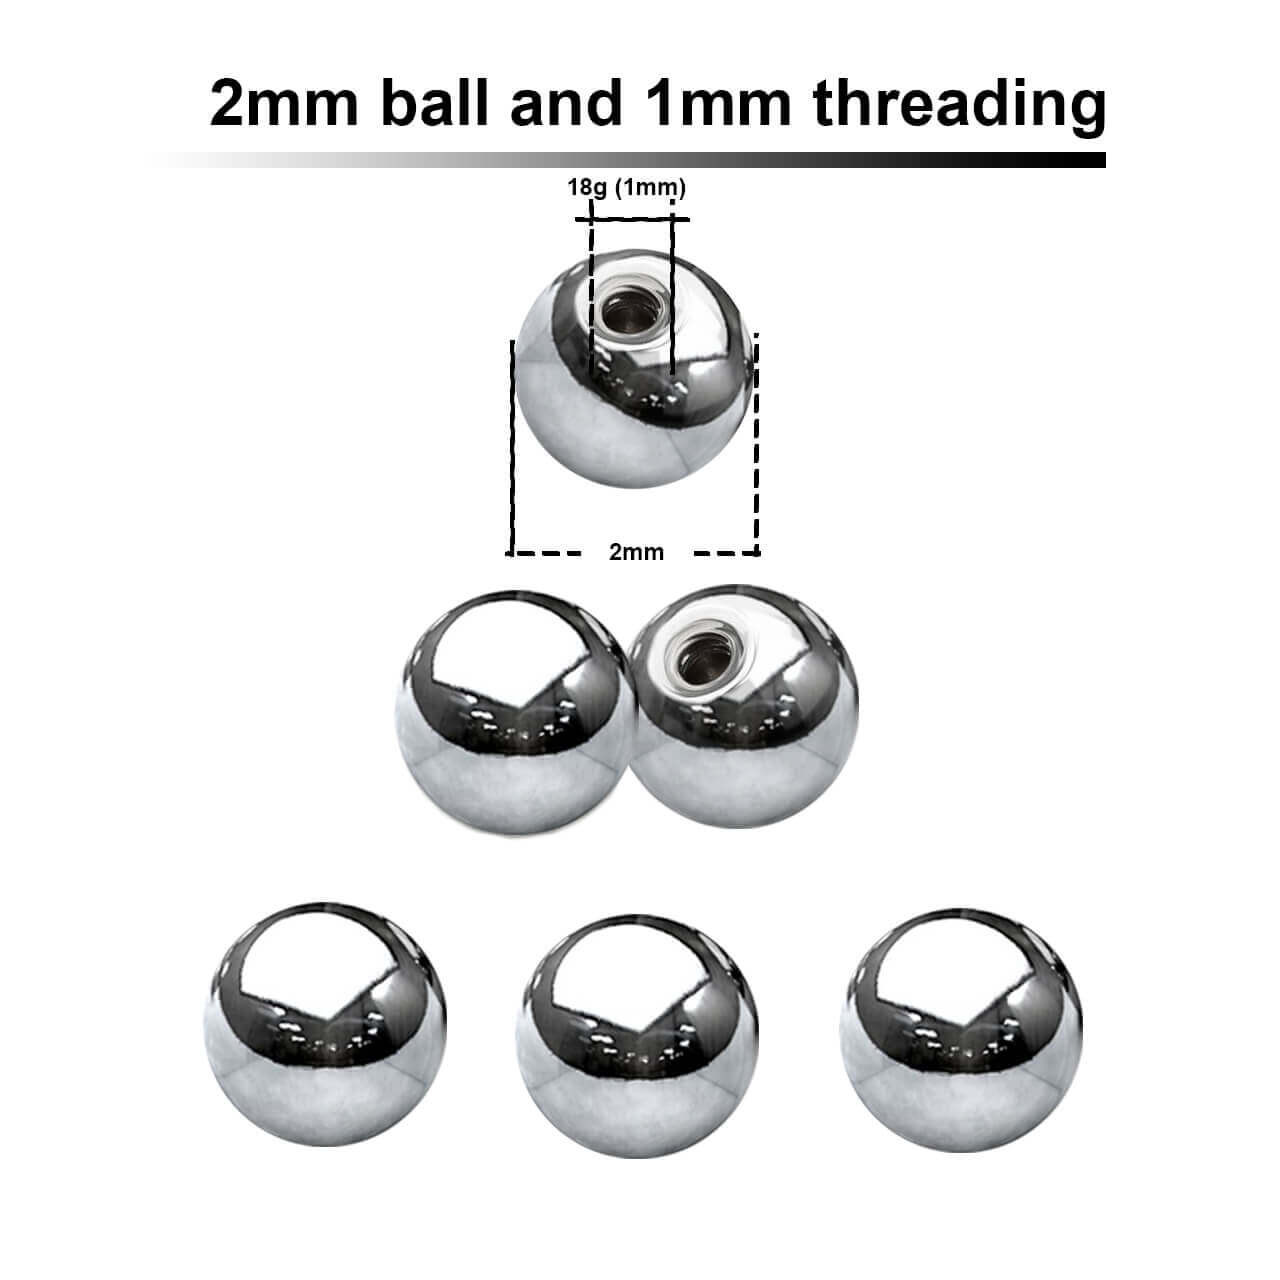 SYB1N2 Piercing studio supplies: Pack of 25 high polished surgical steel balls with 2mm diameter and a 1mm threading